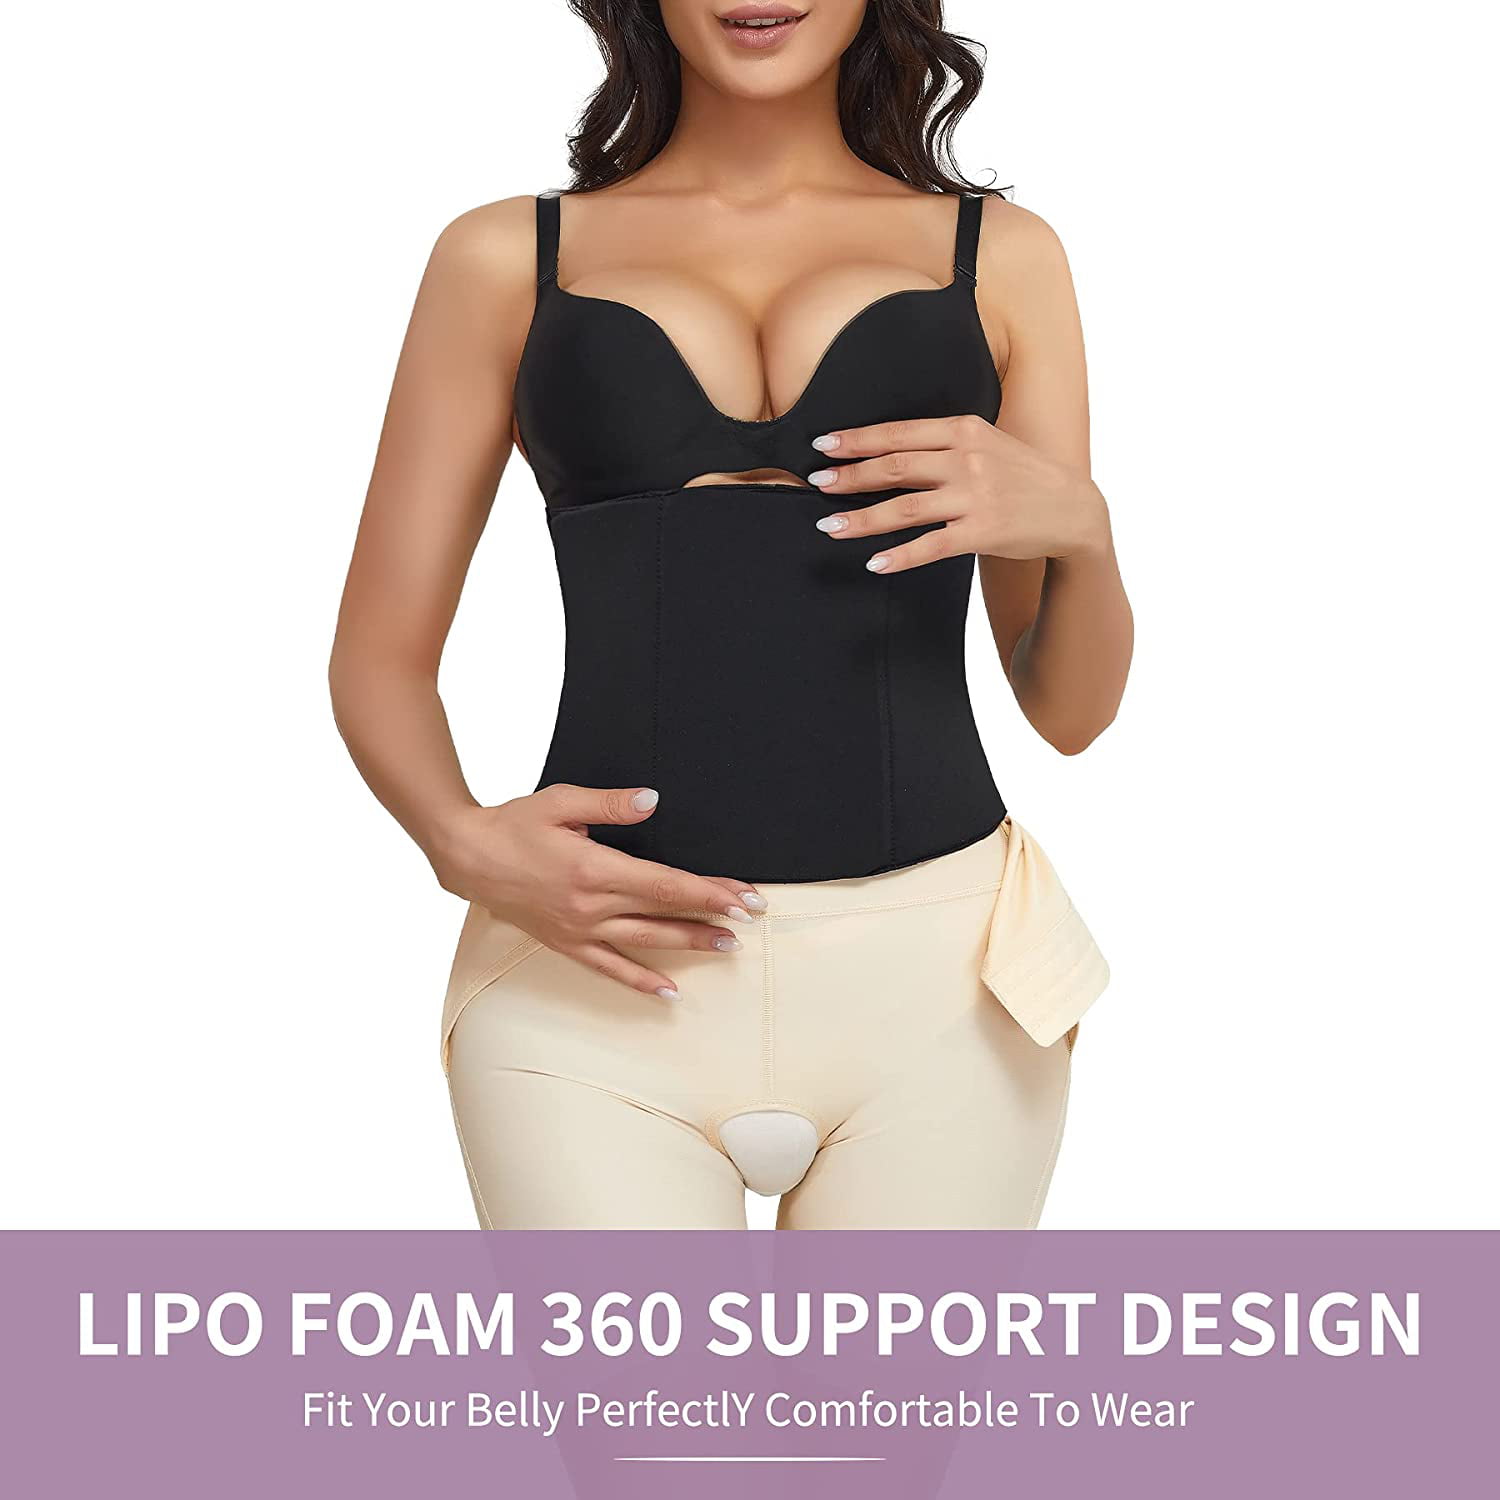 Fajabonita Curve it up. - Lipo Foam provides uniform compression over  suctioned area. It can be inserted between a garment and suctioned area.  #liposuctionsurgery #lipo #surgery